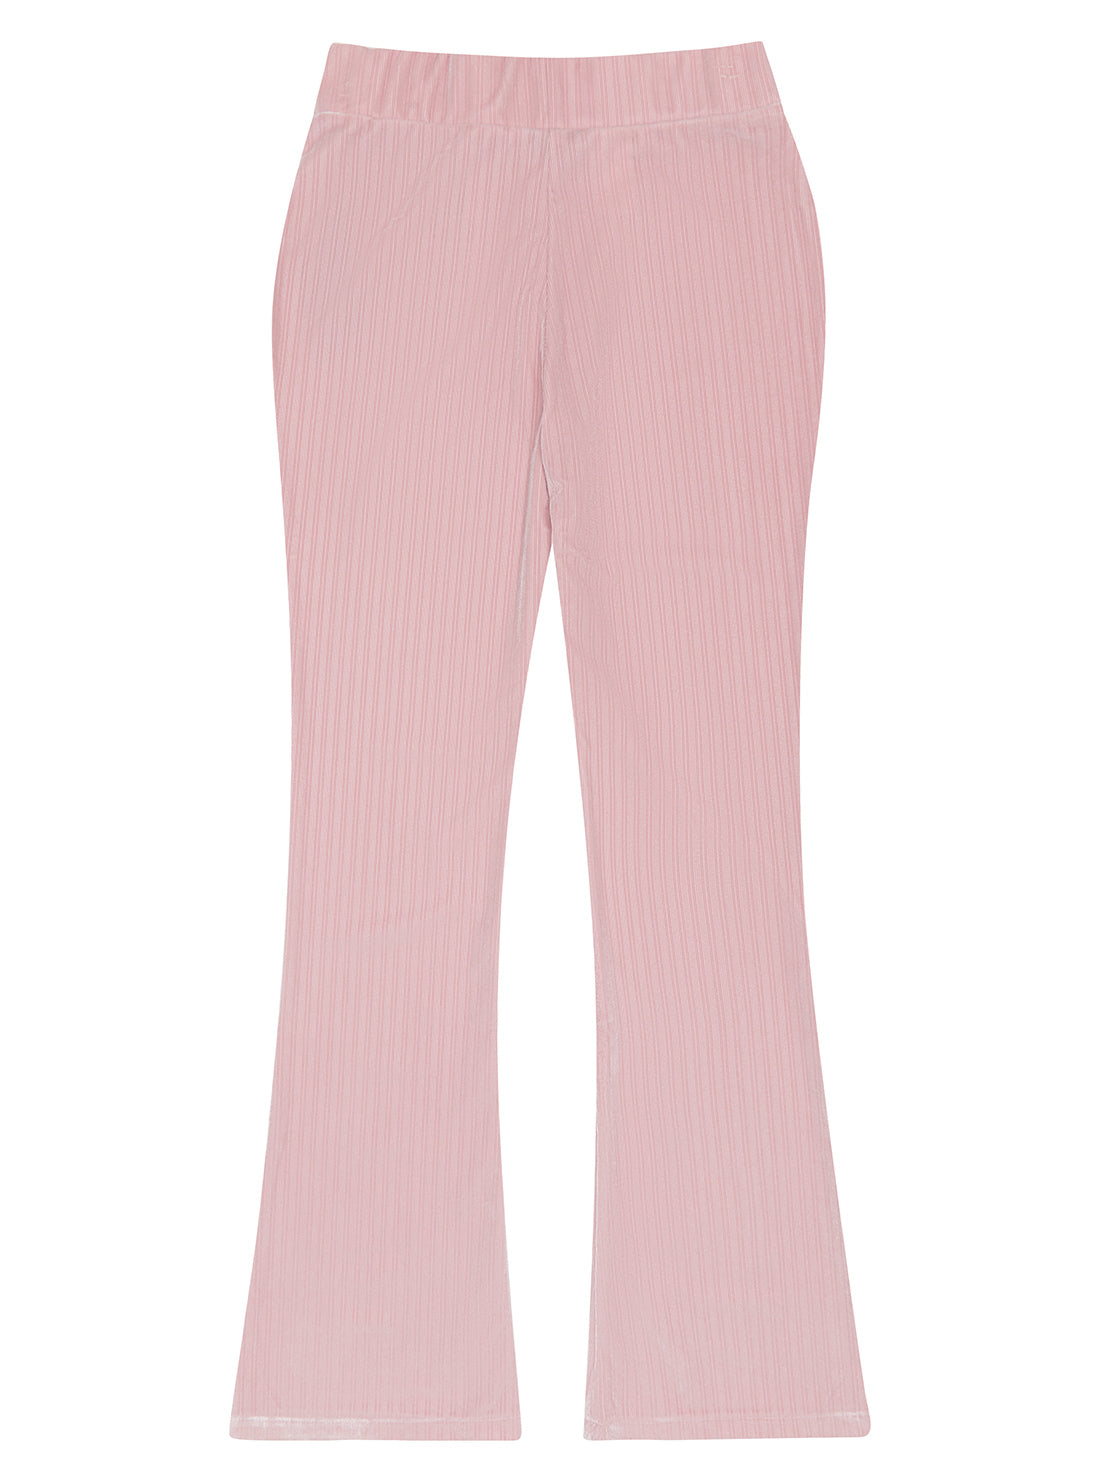 GUESS Pink Velour Long Pants (7-16) front view